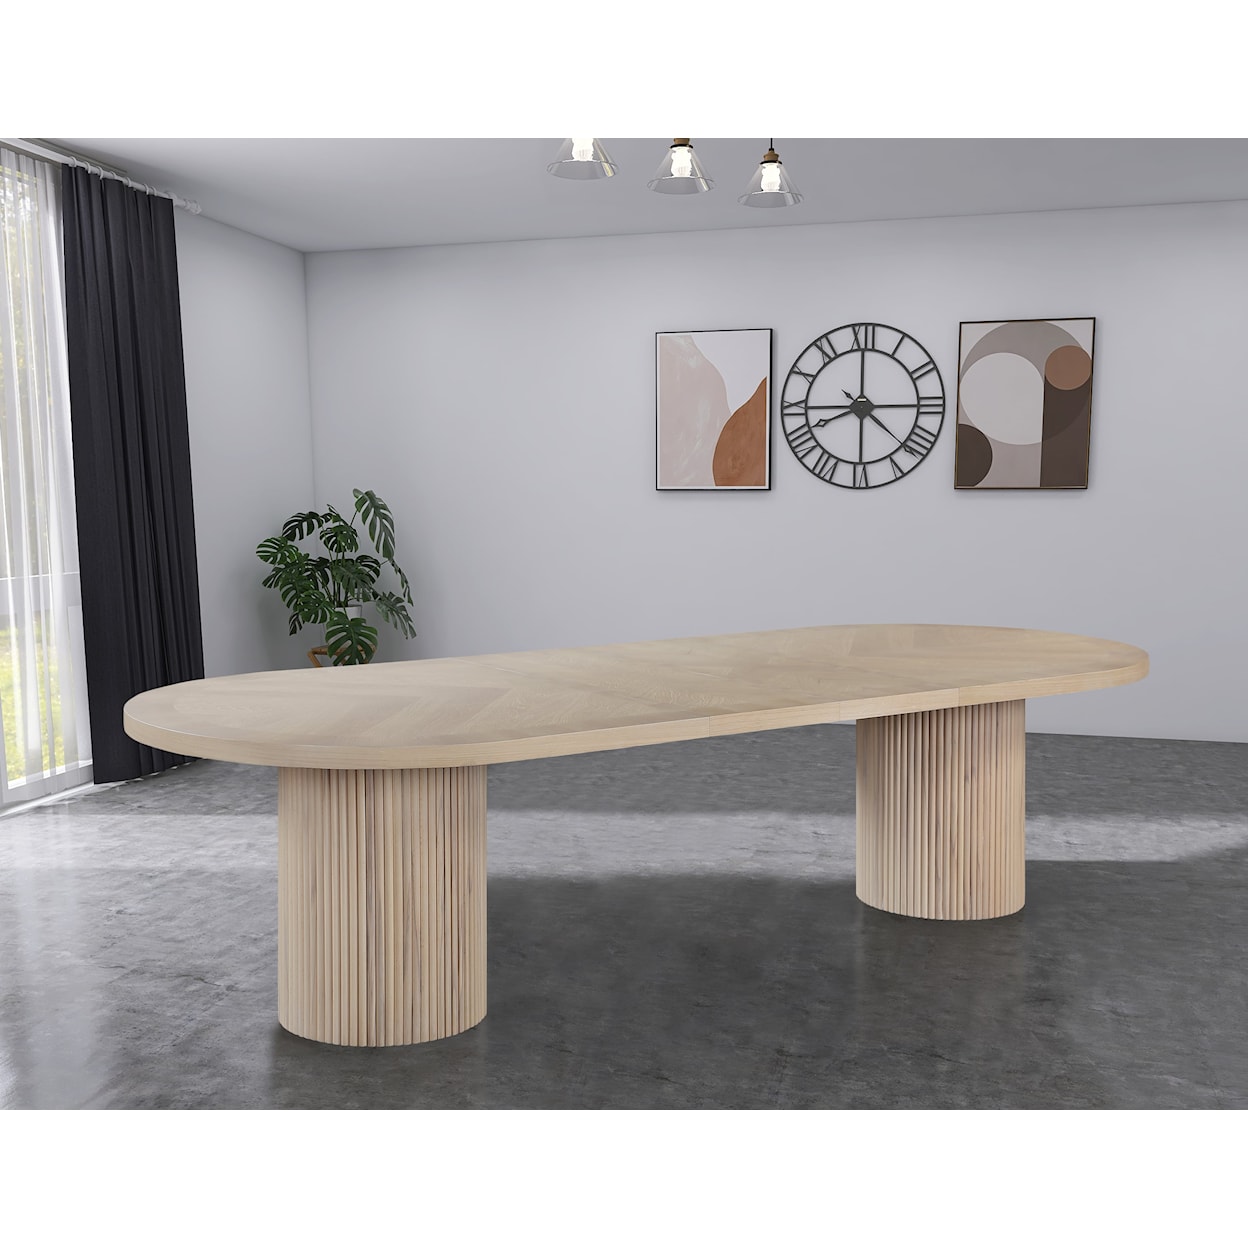 Meridian Furniture Belinda White Oak Dining Table with Table Leaves